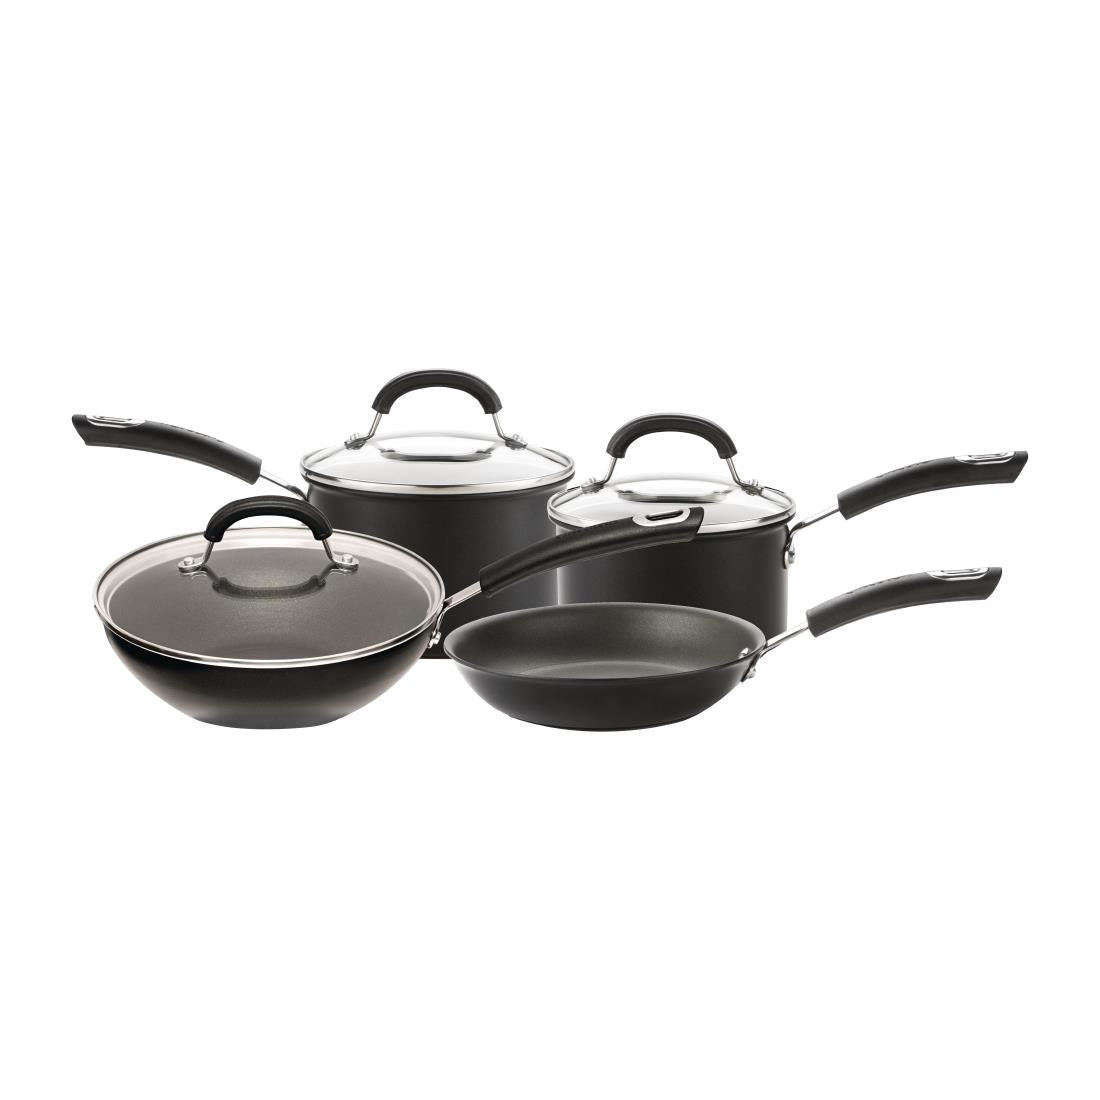 FT627 Circulon Total Hard Anodized 4 Piece Pan Set JD Catering Equipment Solutions Ltd